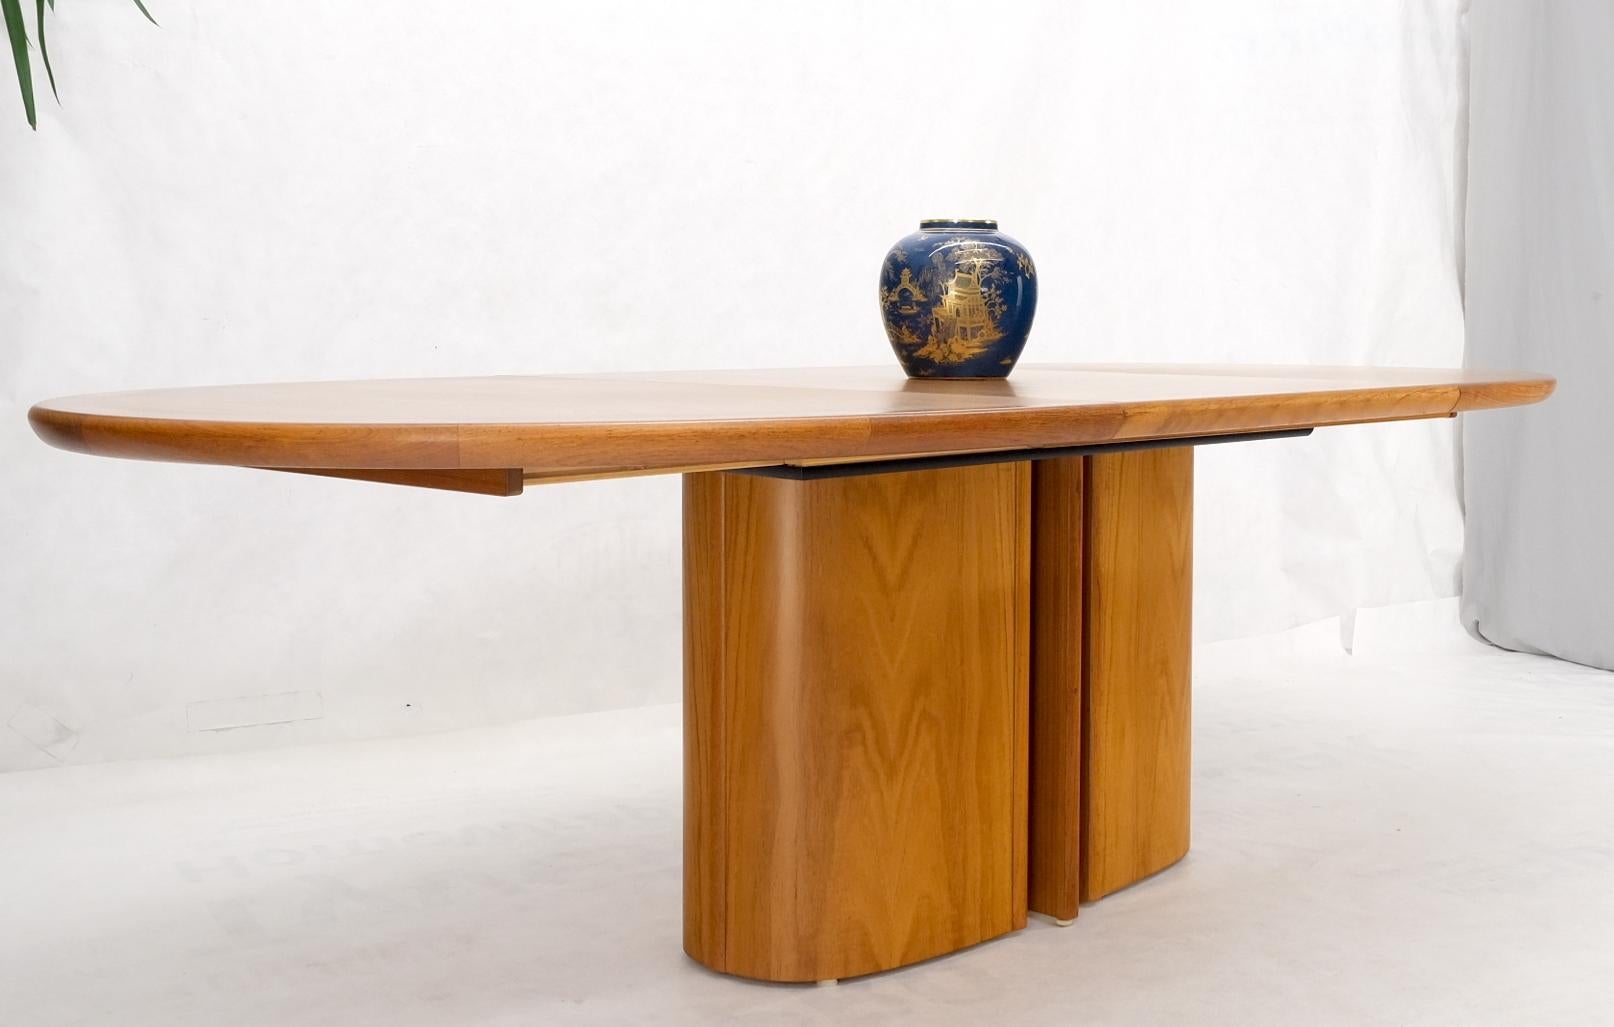 Lacquered Danish Mid-Century Modern Oval Teak Dining Table w/ Pop Up Leaf Extension MINT!